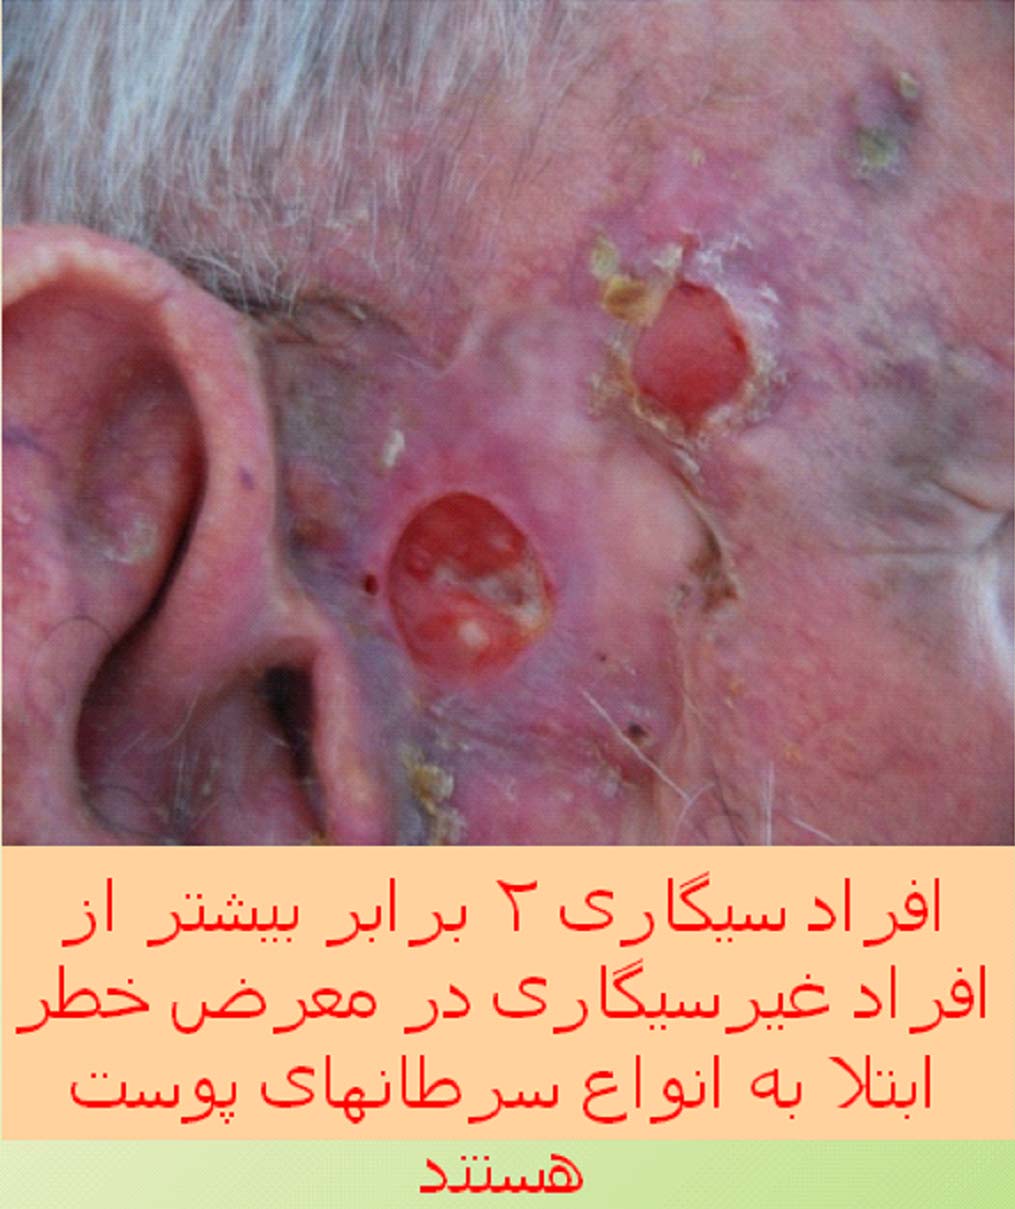 Iran 2009 Health Effects Other - skin cancer, lived experience